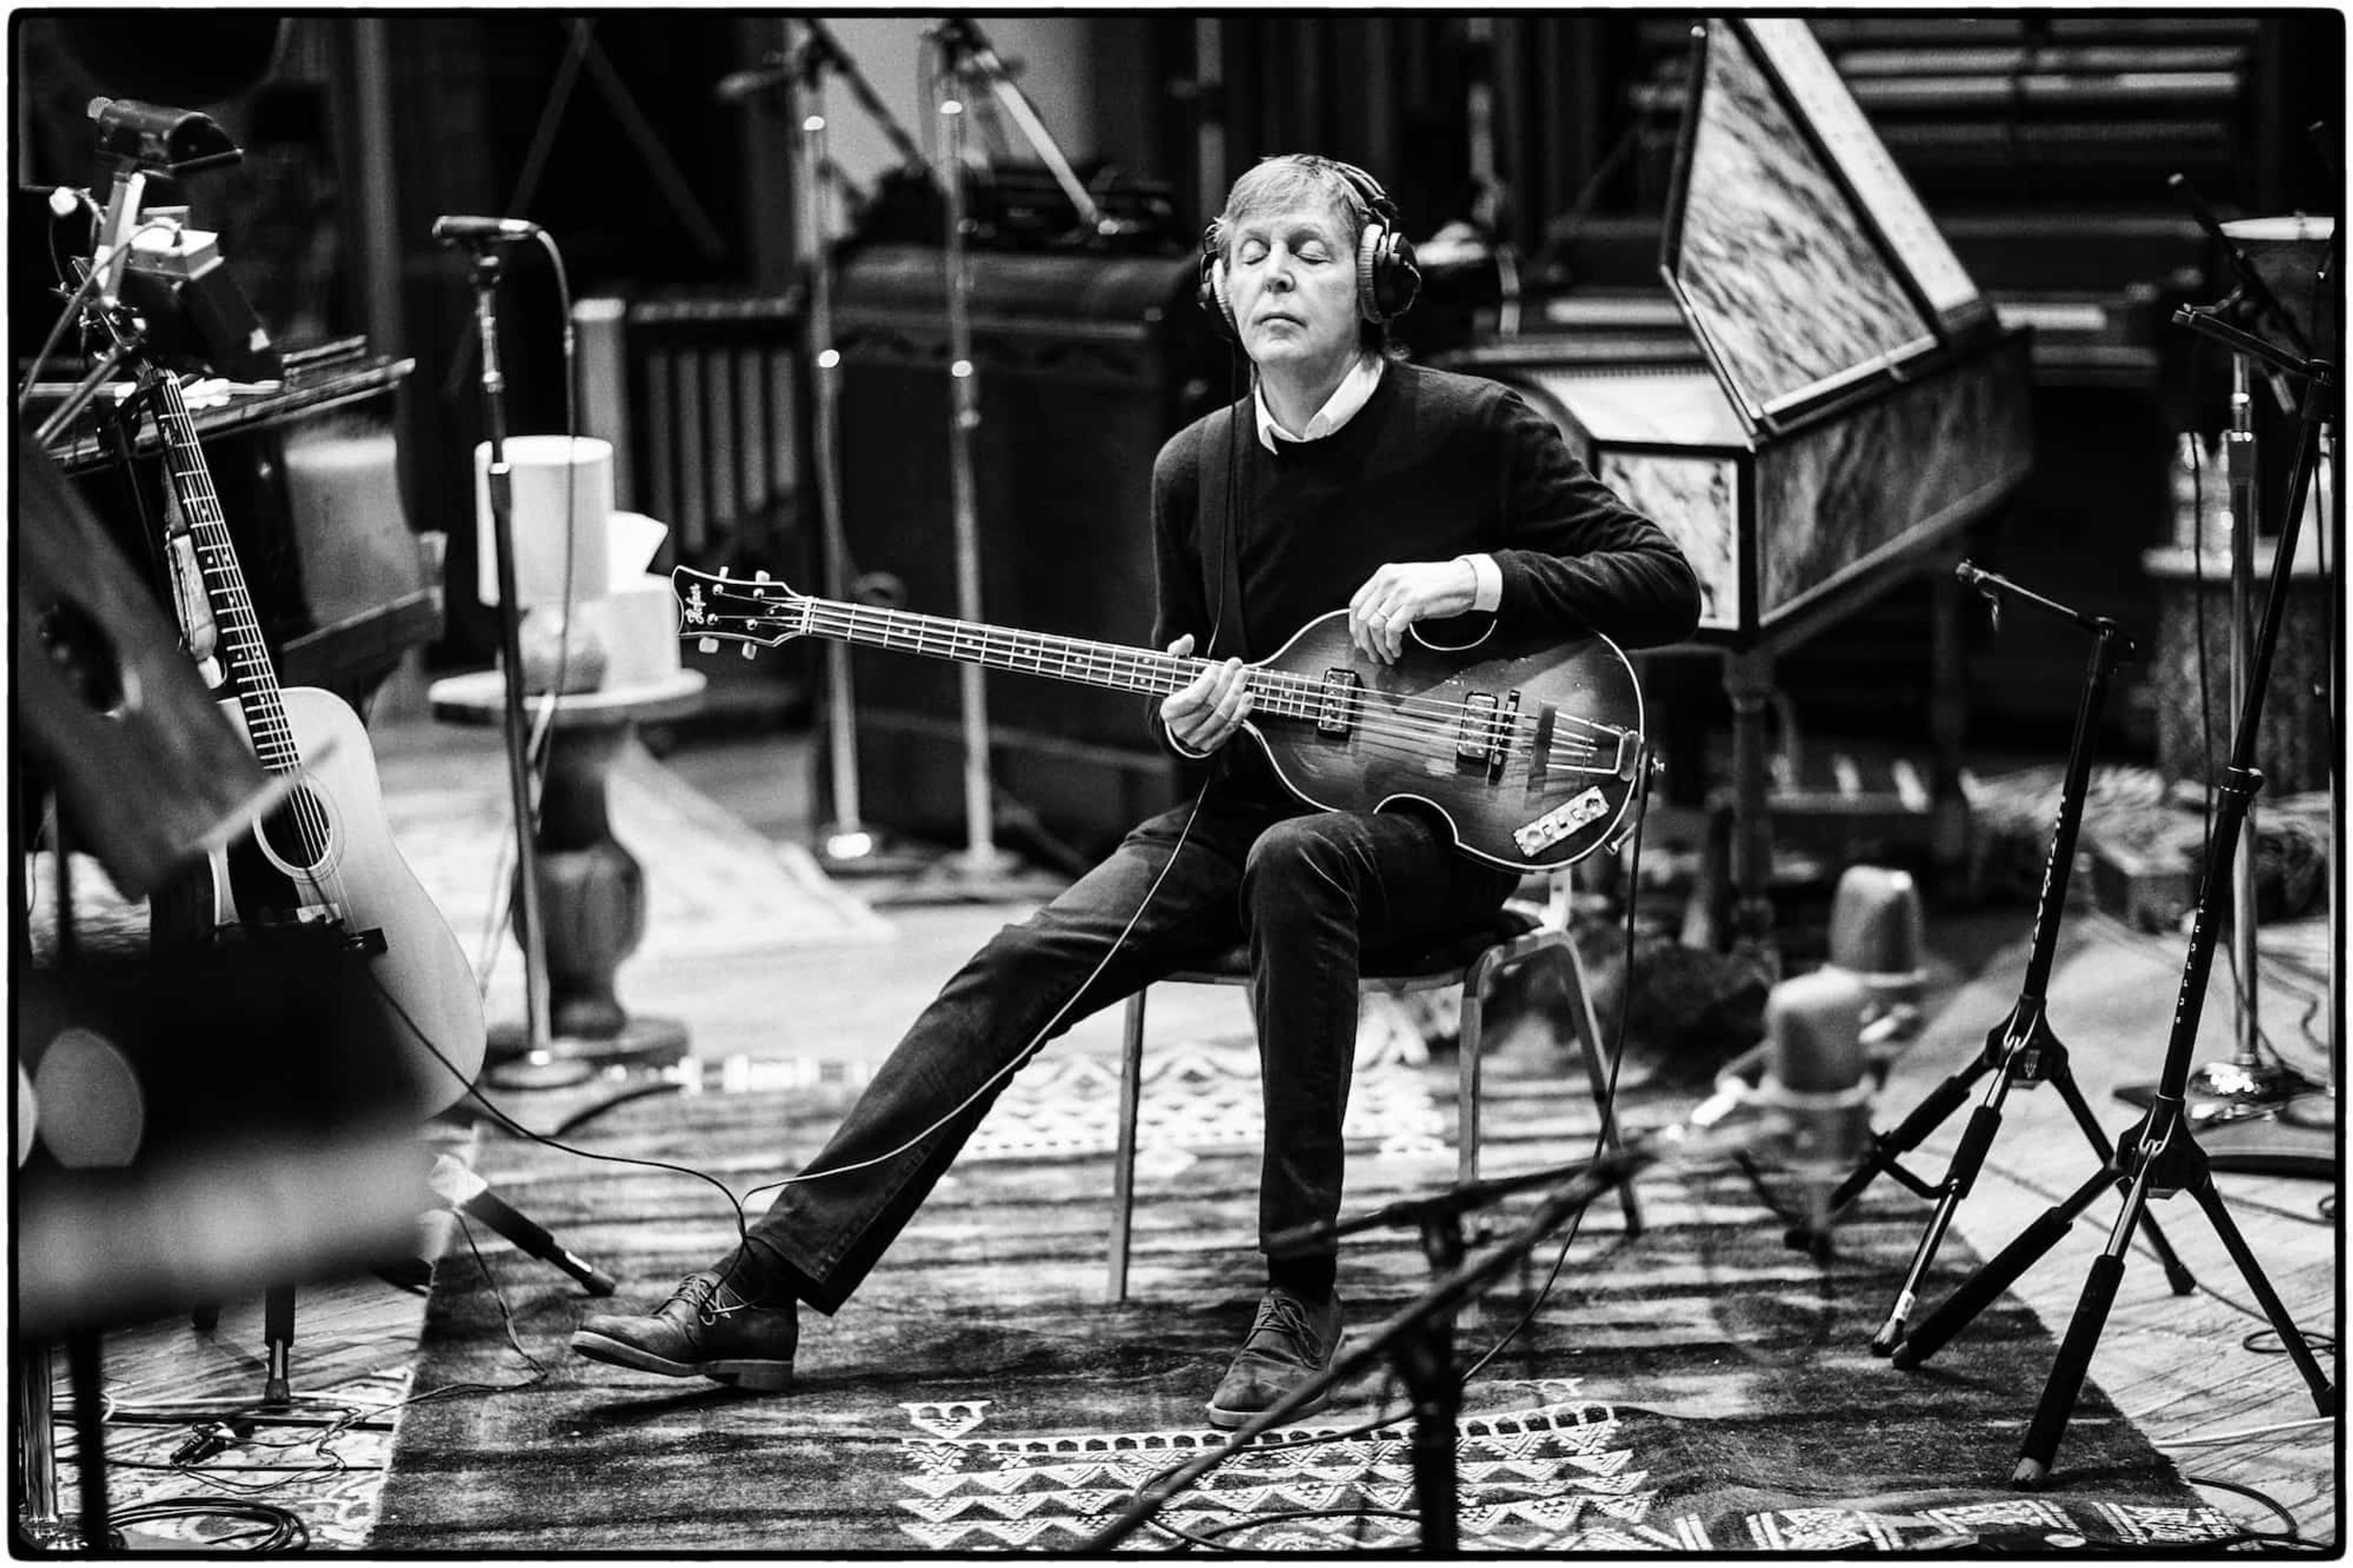 Photo of Paul playing bass at Henson Studios in LA in 2017